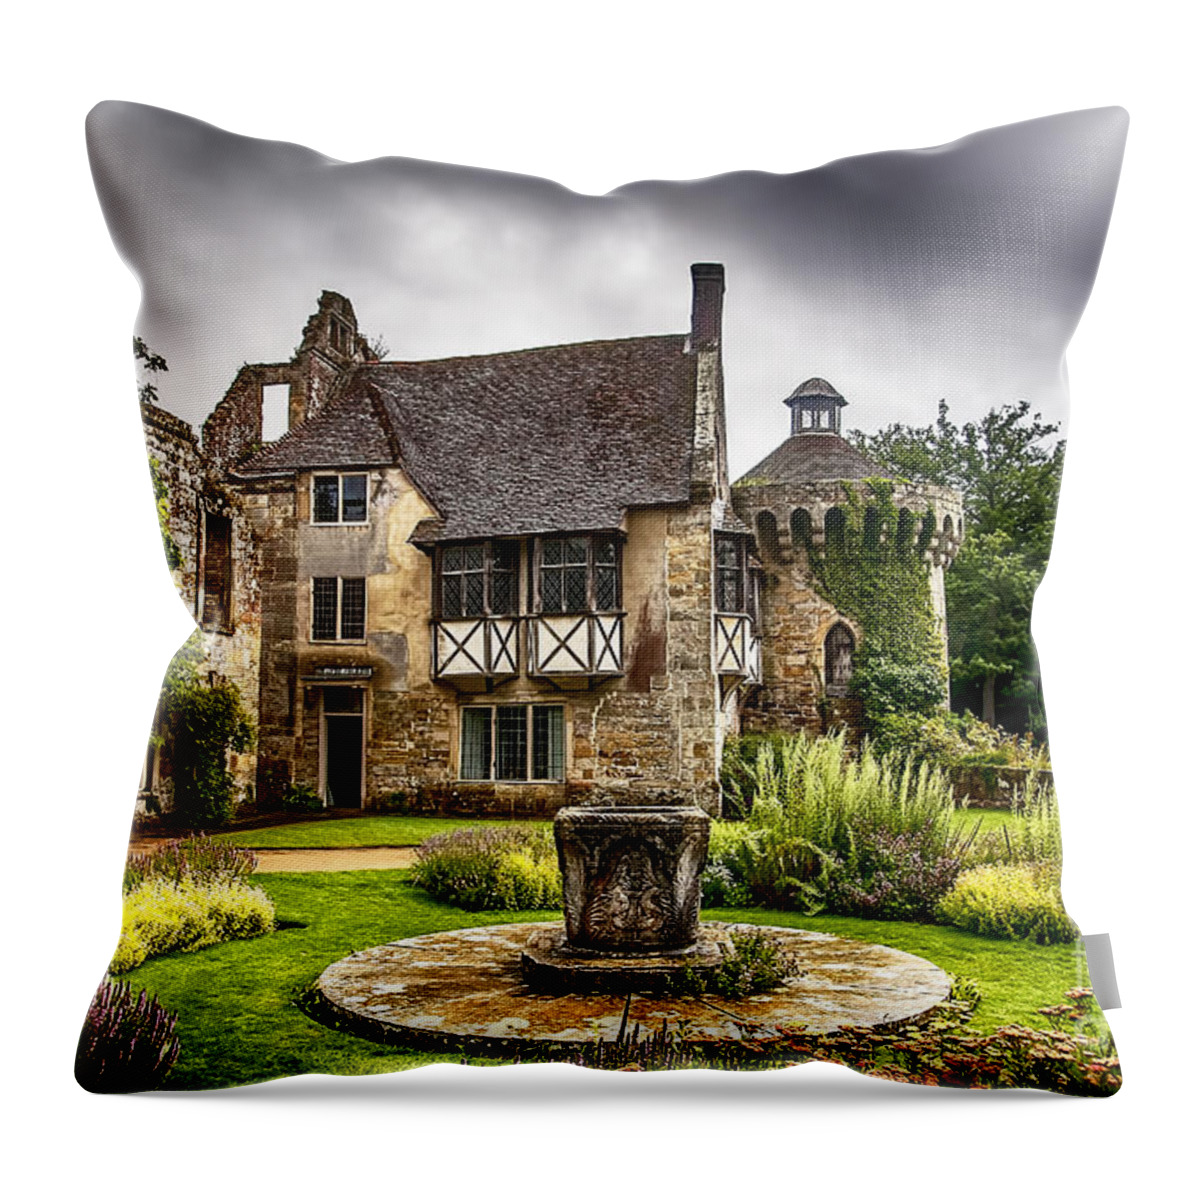 Scotney Castle Throw Pillow featuring the photograph Scotney Castle 4 by Chris Thaxter